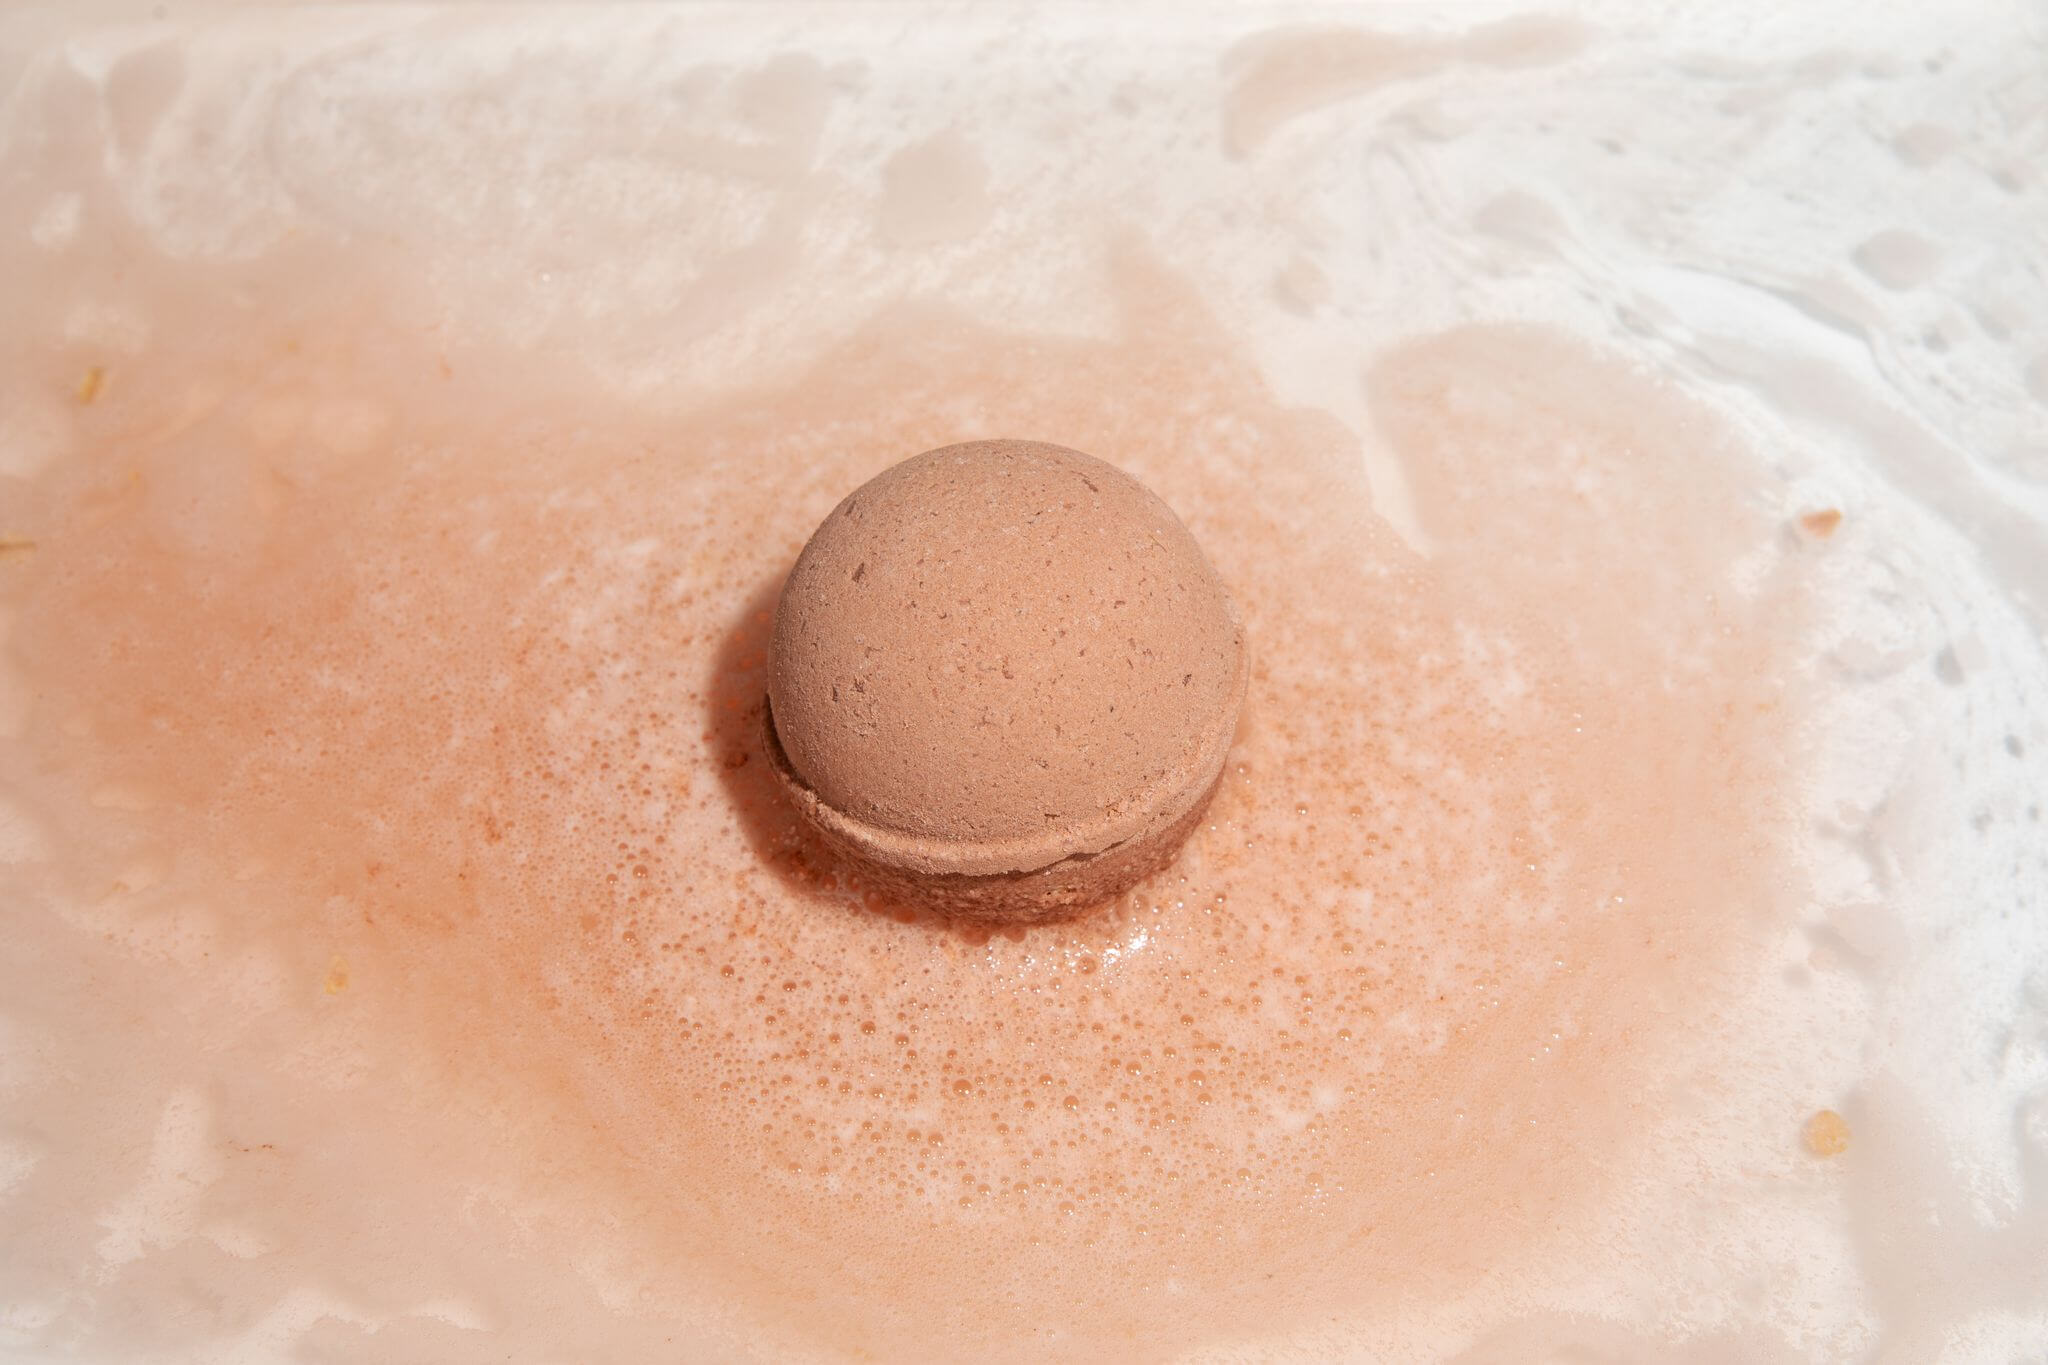 Tub Therapy | Vanilla Sandalwood CBD bath bomb fizzing in water, turning it into a soft mocha brown color.